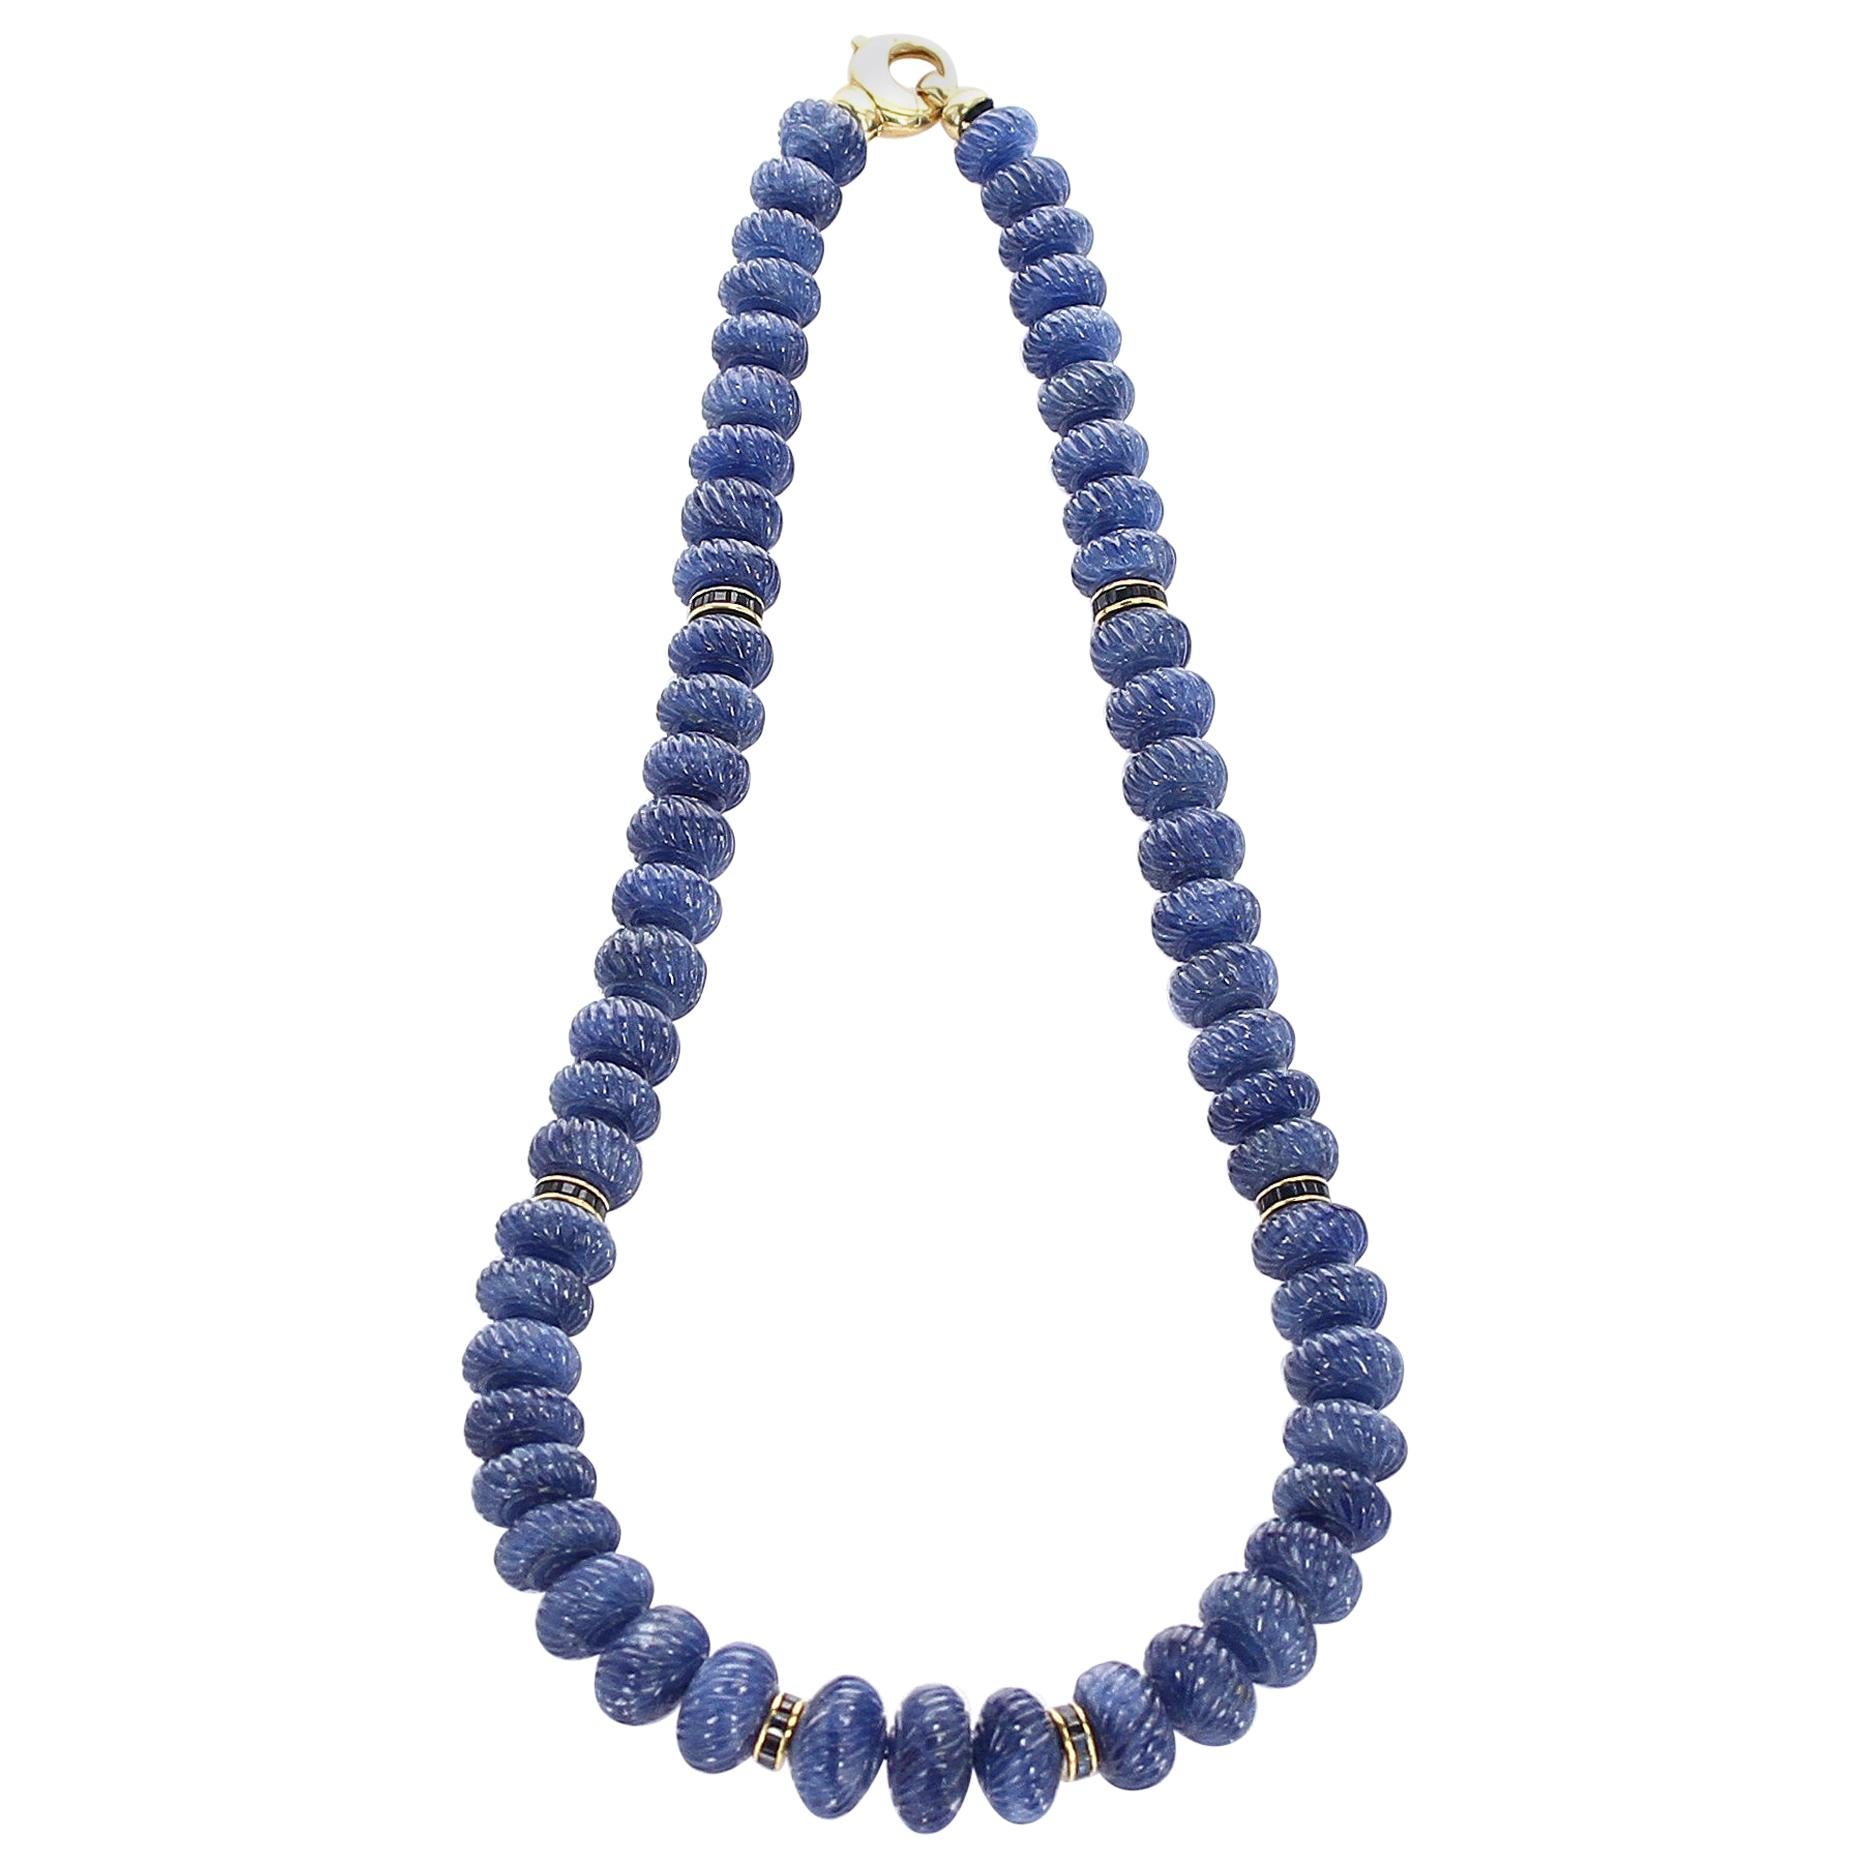 963.00 Cts Earth Mined Blue Sapphire 2 Line Pear Shape Beads Hand Made Necklace 